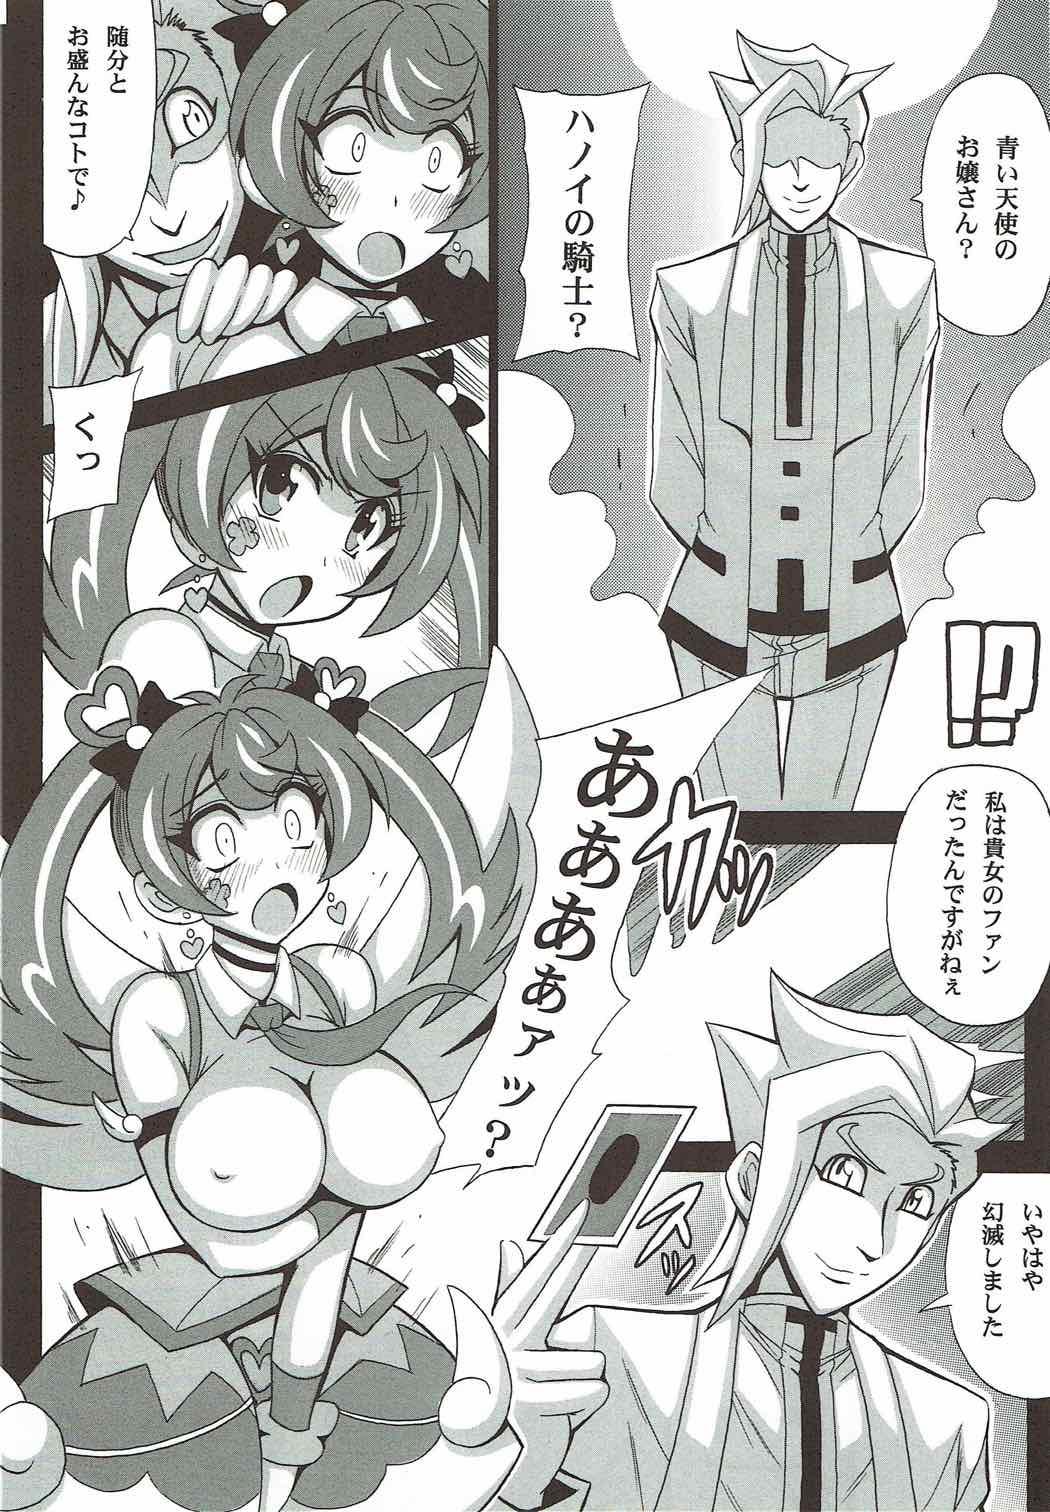 Nudes BLUE VRAINS - Yu-gi-oh Yu-gi-oh vrains Solo - Page 9